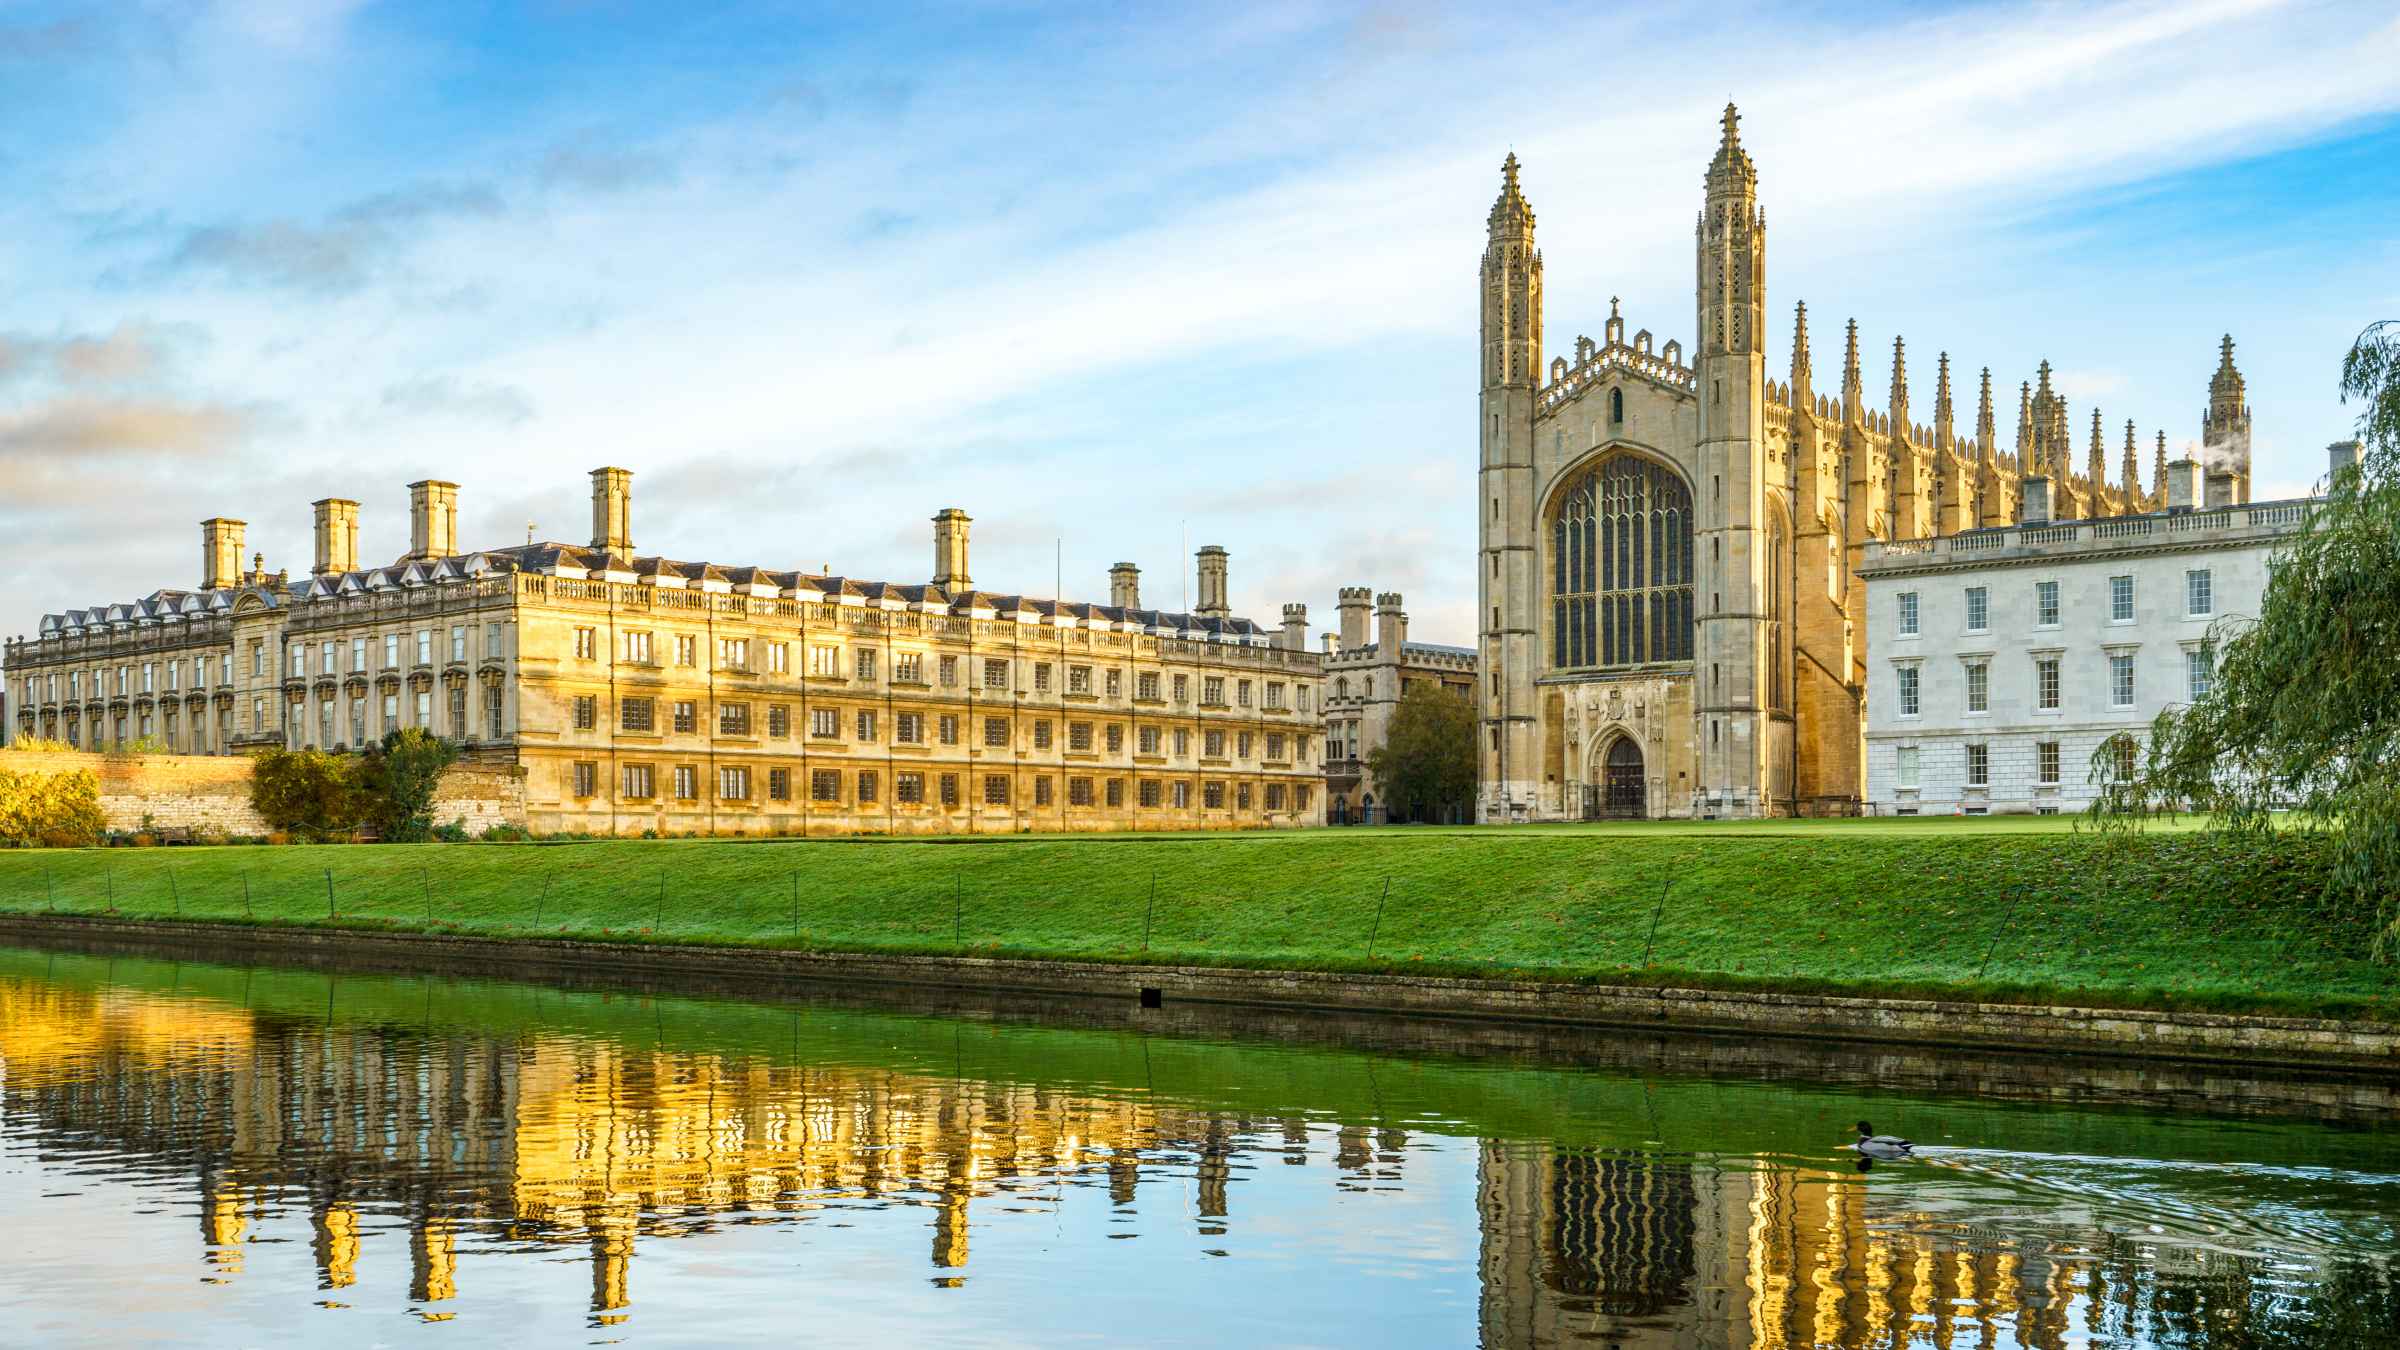 can you visit king's college cambridge